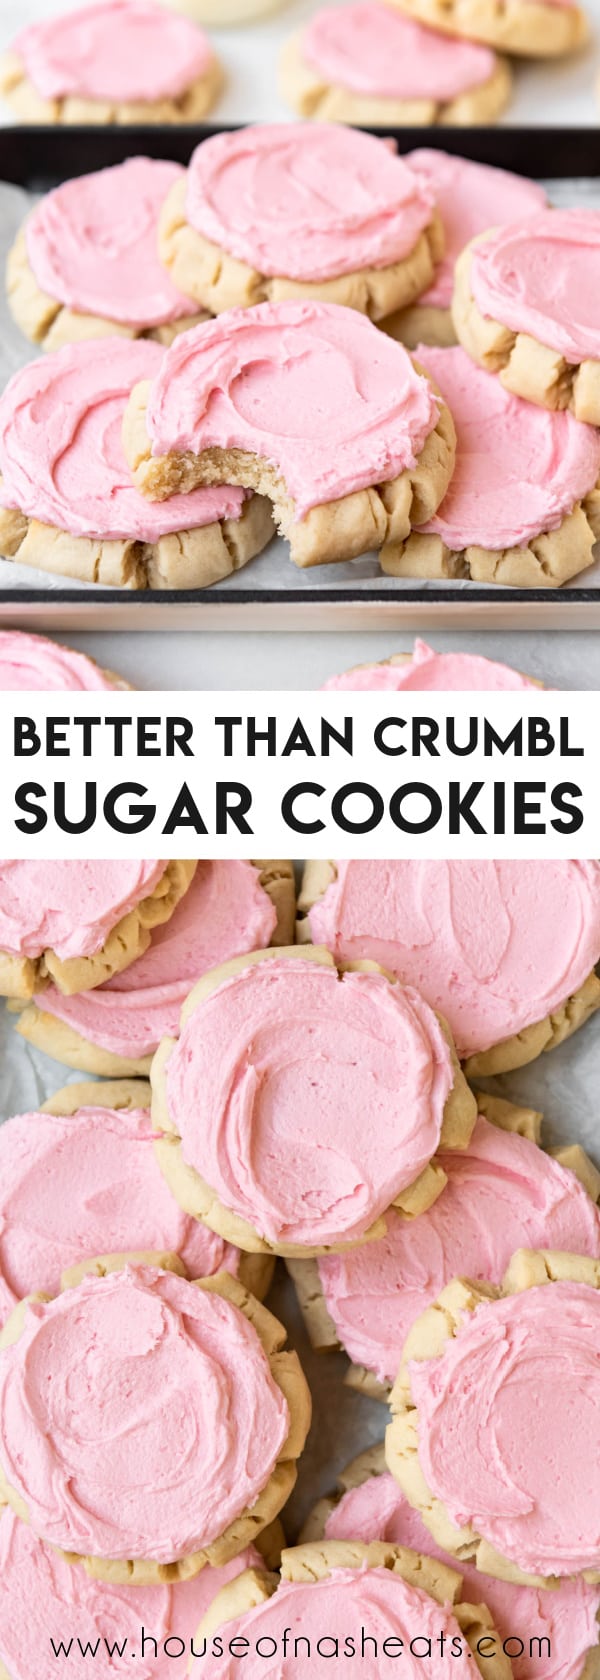 A collage of images of pink frosted sugar cookies with text overlay.